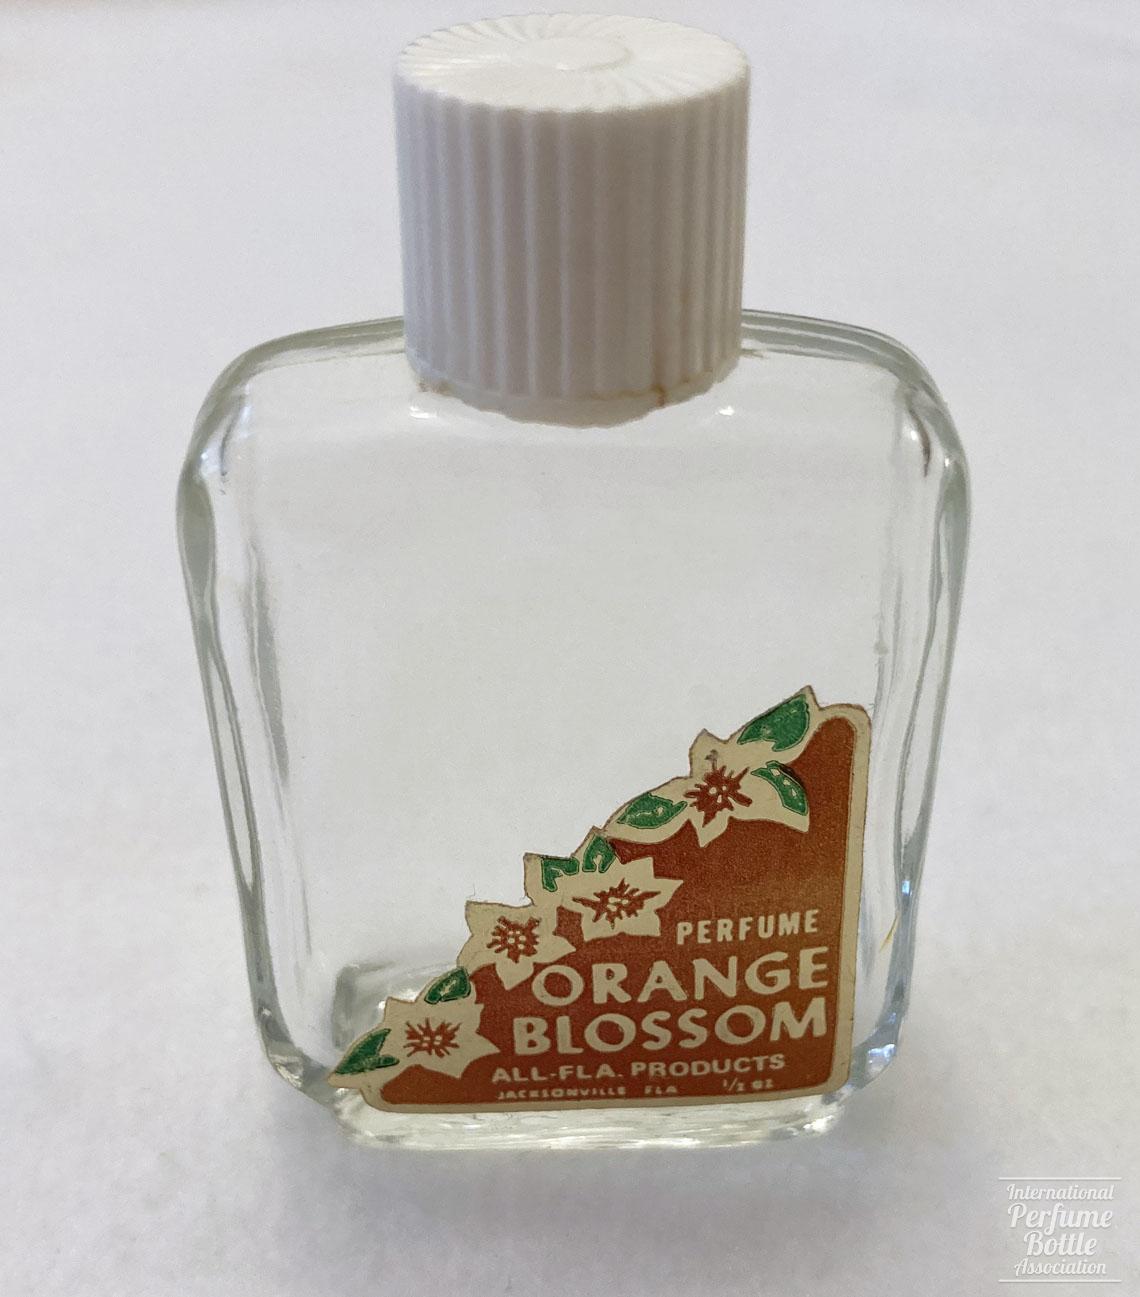 "Orange Blossom" by All-Fla Products